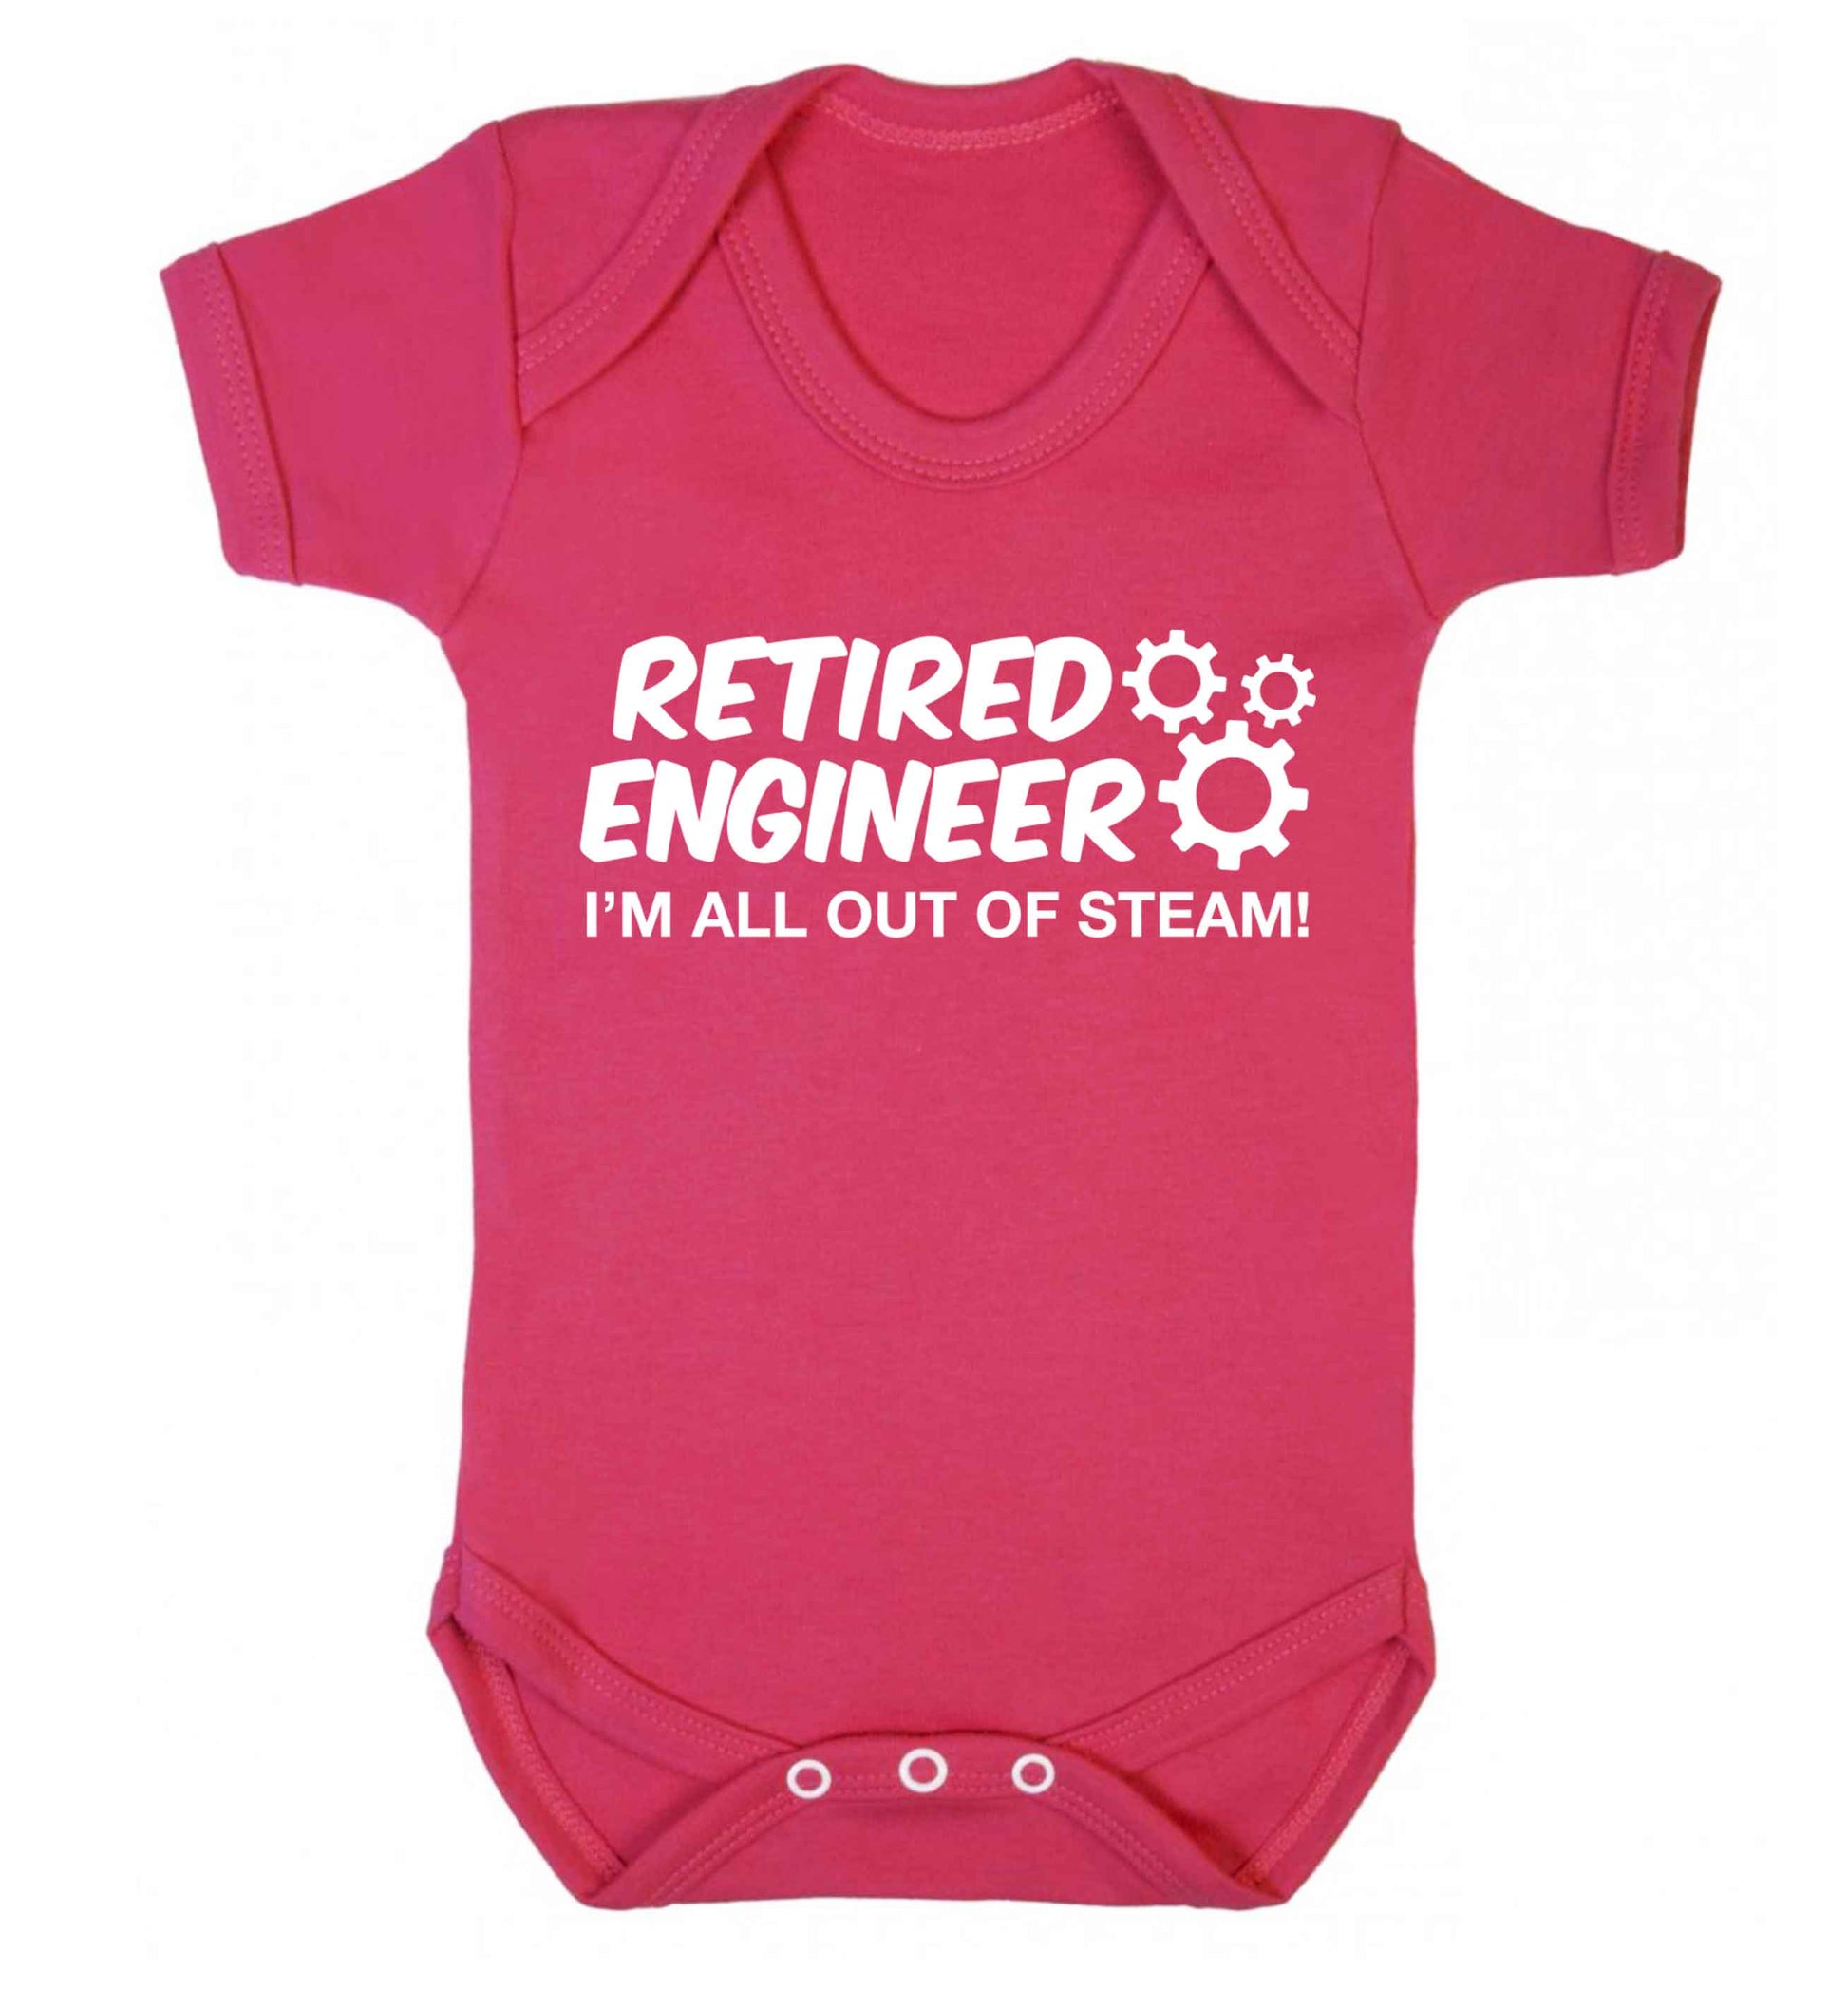 Retired engineer I'm all out of steam Baby Vest dark pink 18-24 months